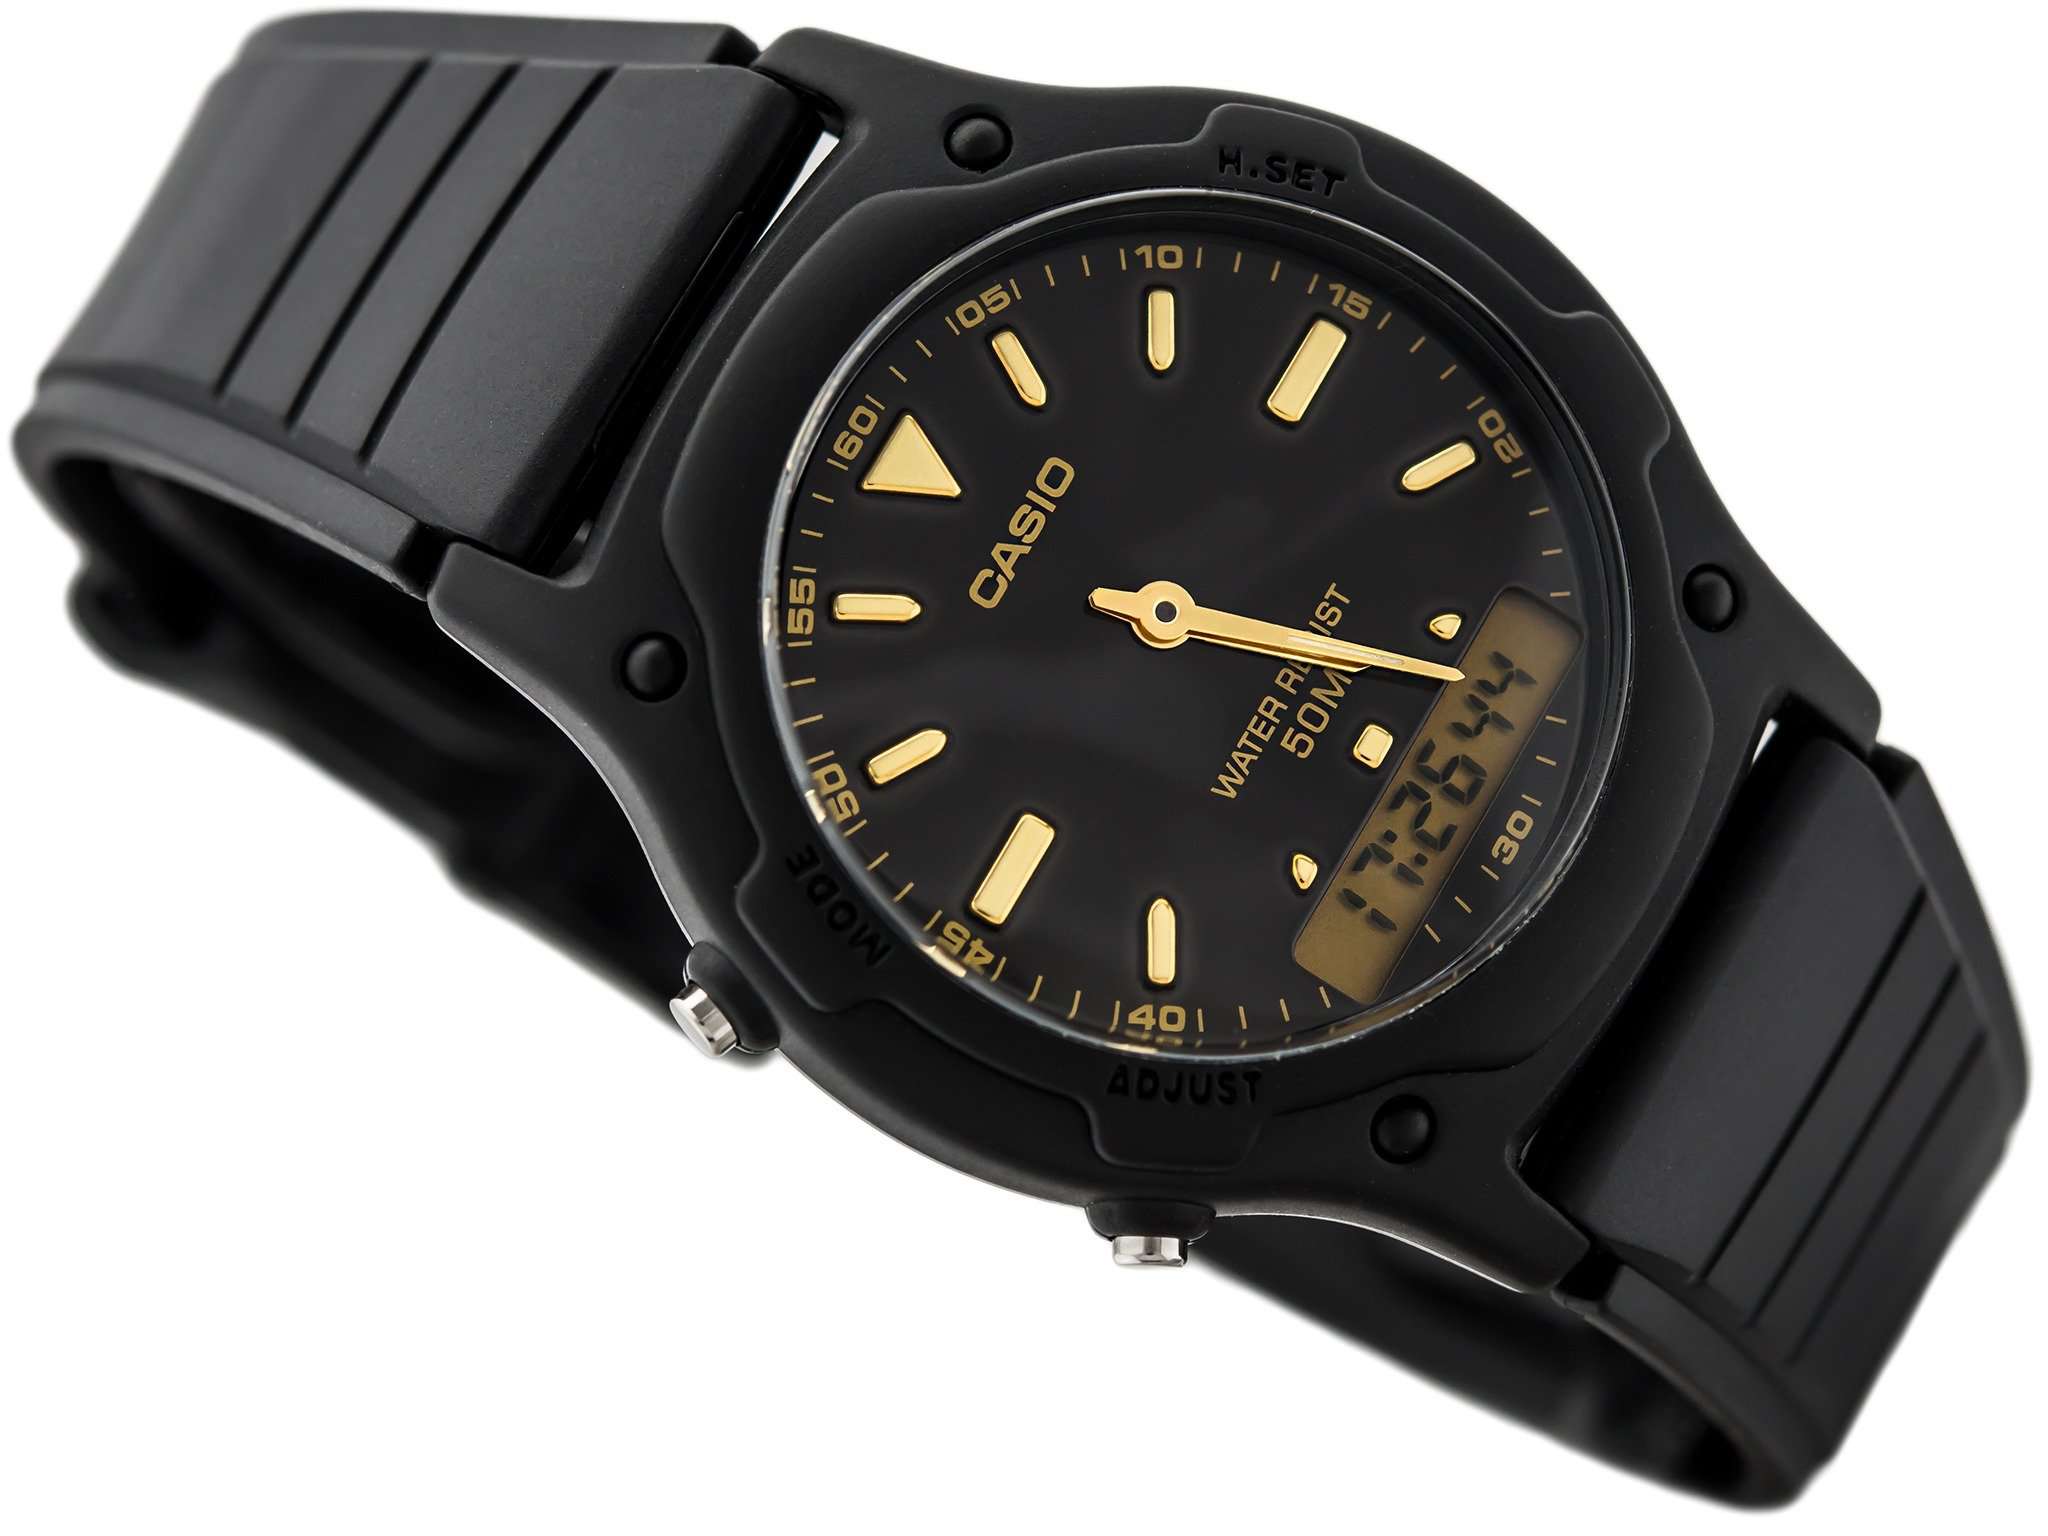 Casio AW-49H-1BVDF Black Resin Watch for Men and Women-Watch Portal Philippines